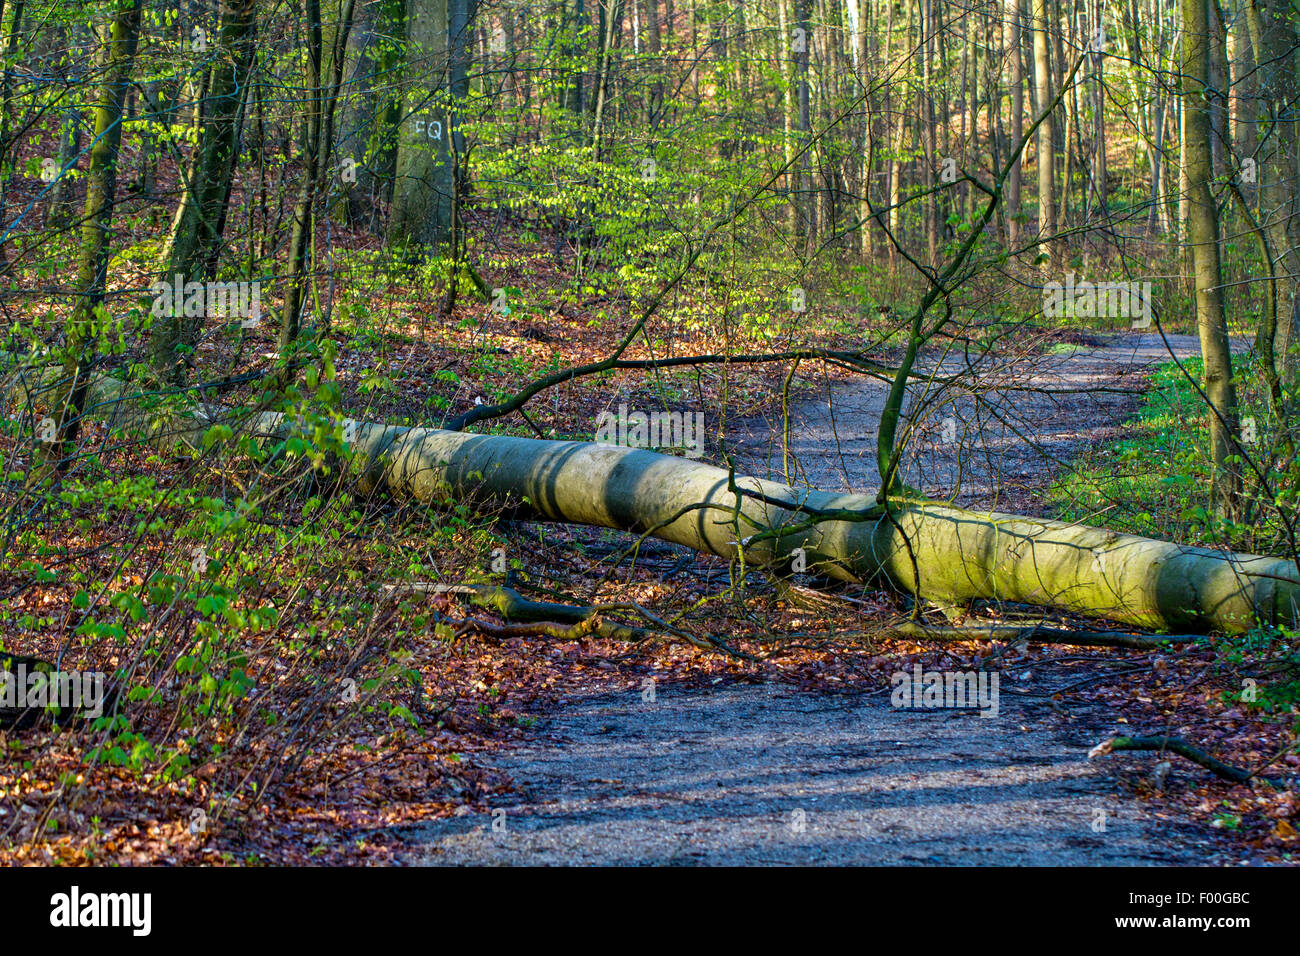 common beech (Fagus sylvatica), fallen trunk on forest path, Germany, Mecklenburg-Western Pomerania, Huetter Wohld Stock Photo